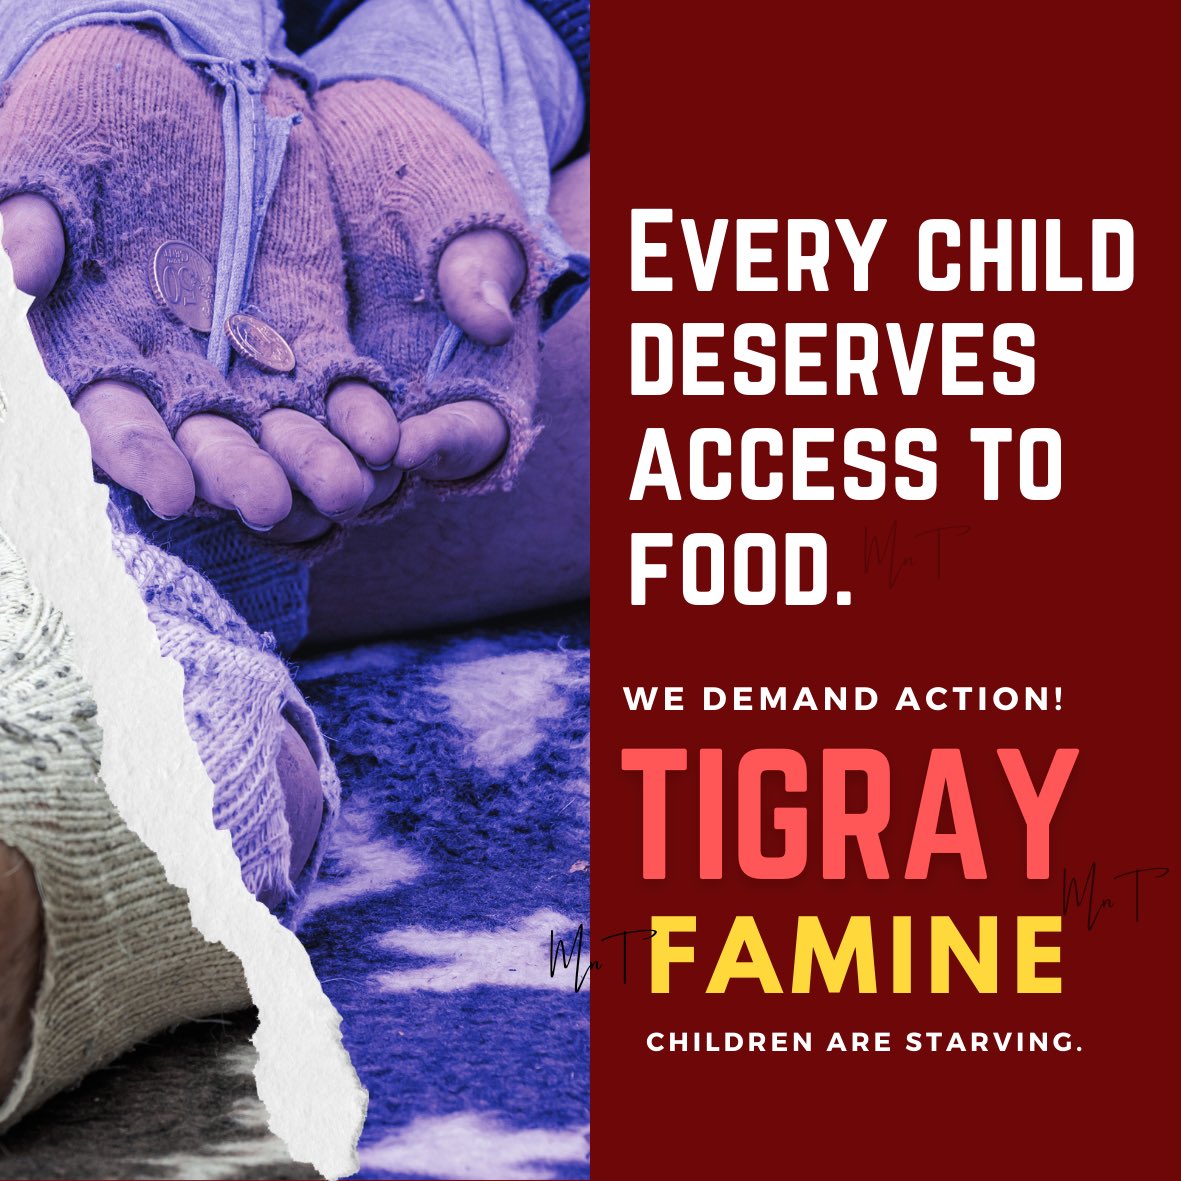 As we sit down to eat, let’s remember the children in #Tigray who are starving. @PowerUSAID and @WFP_Europe It’s time for action to stop & end this tragedy. 
#TigrayFamine #Aid4Tigray #AUSummit   @eu_eeas @MikeHammerUSA @UNICEF 
@WFP @POTUS @UNICEFEthiopia